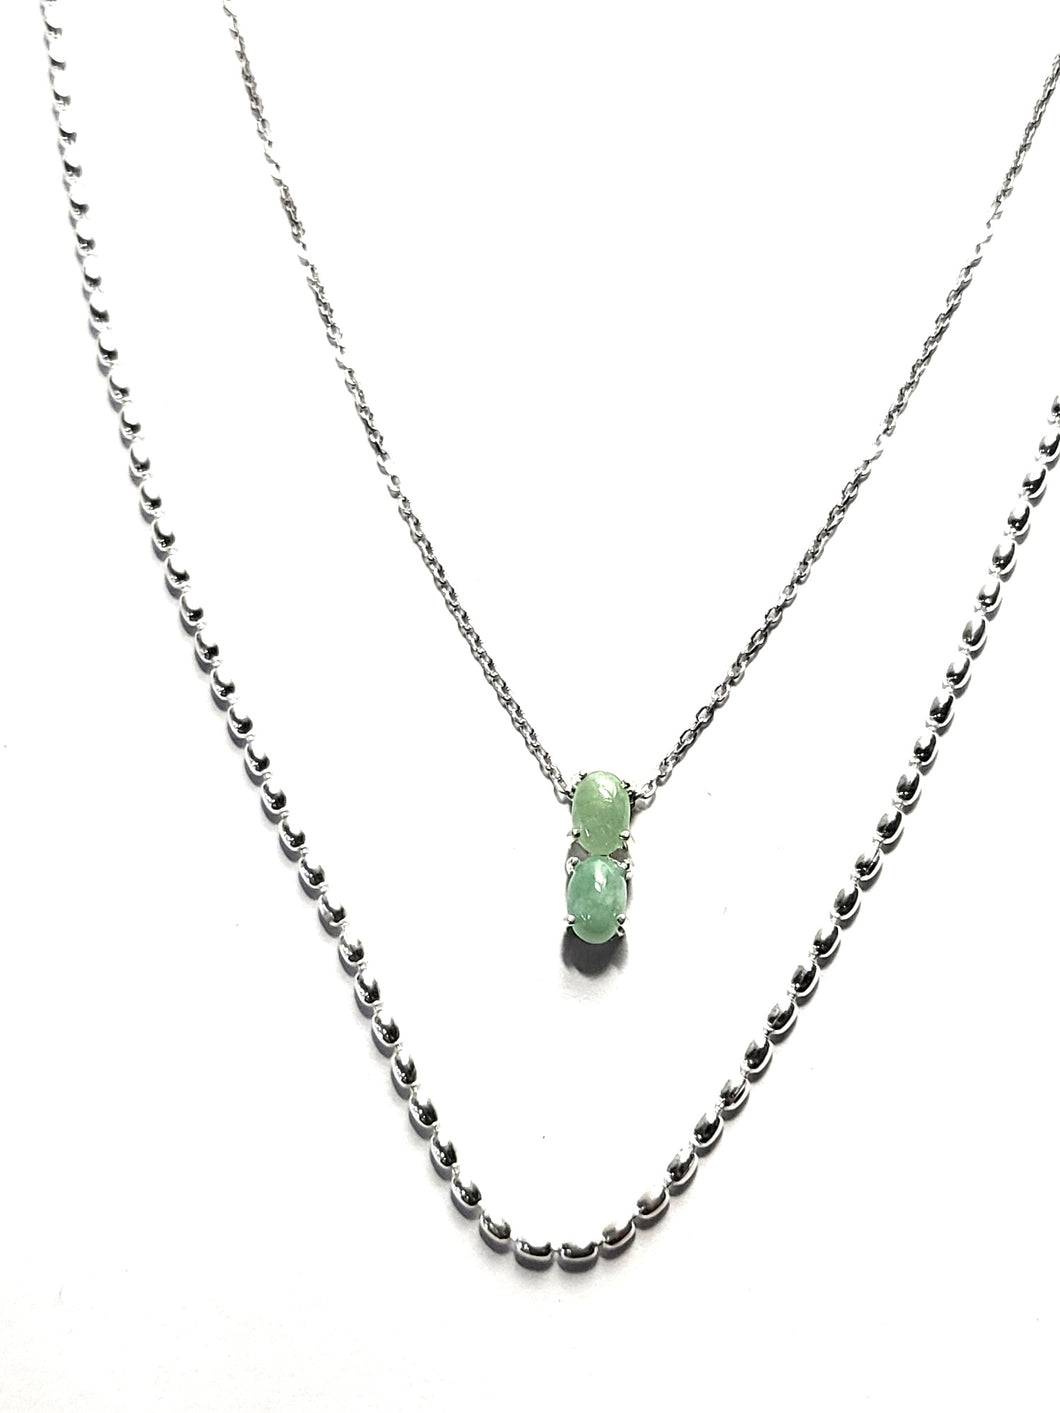 NEW A/T Green Jade Necklace